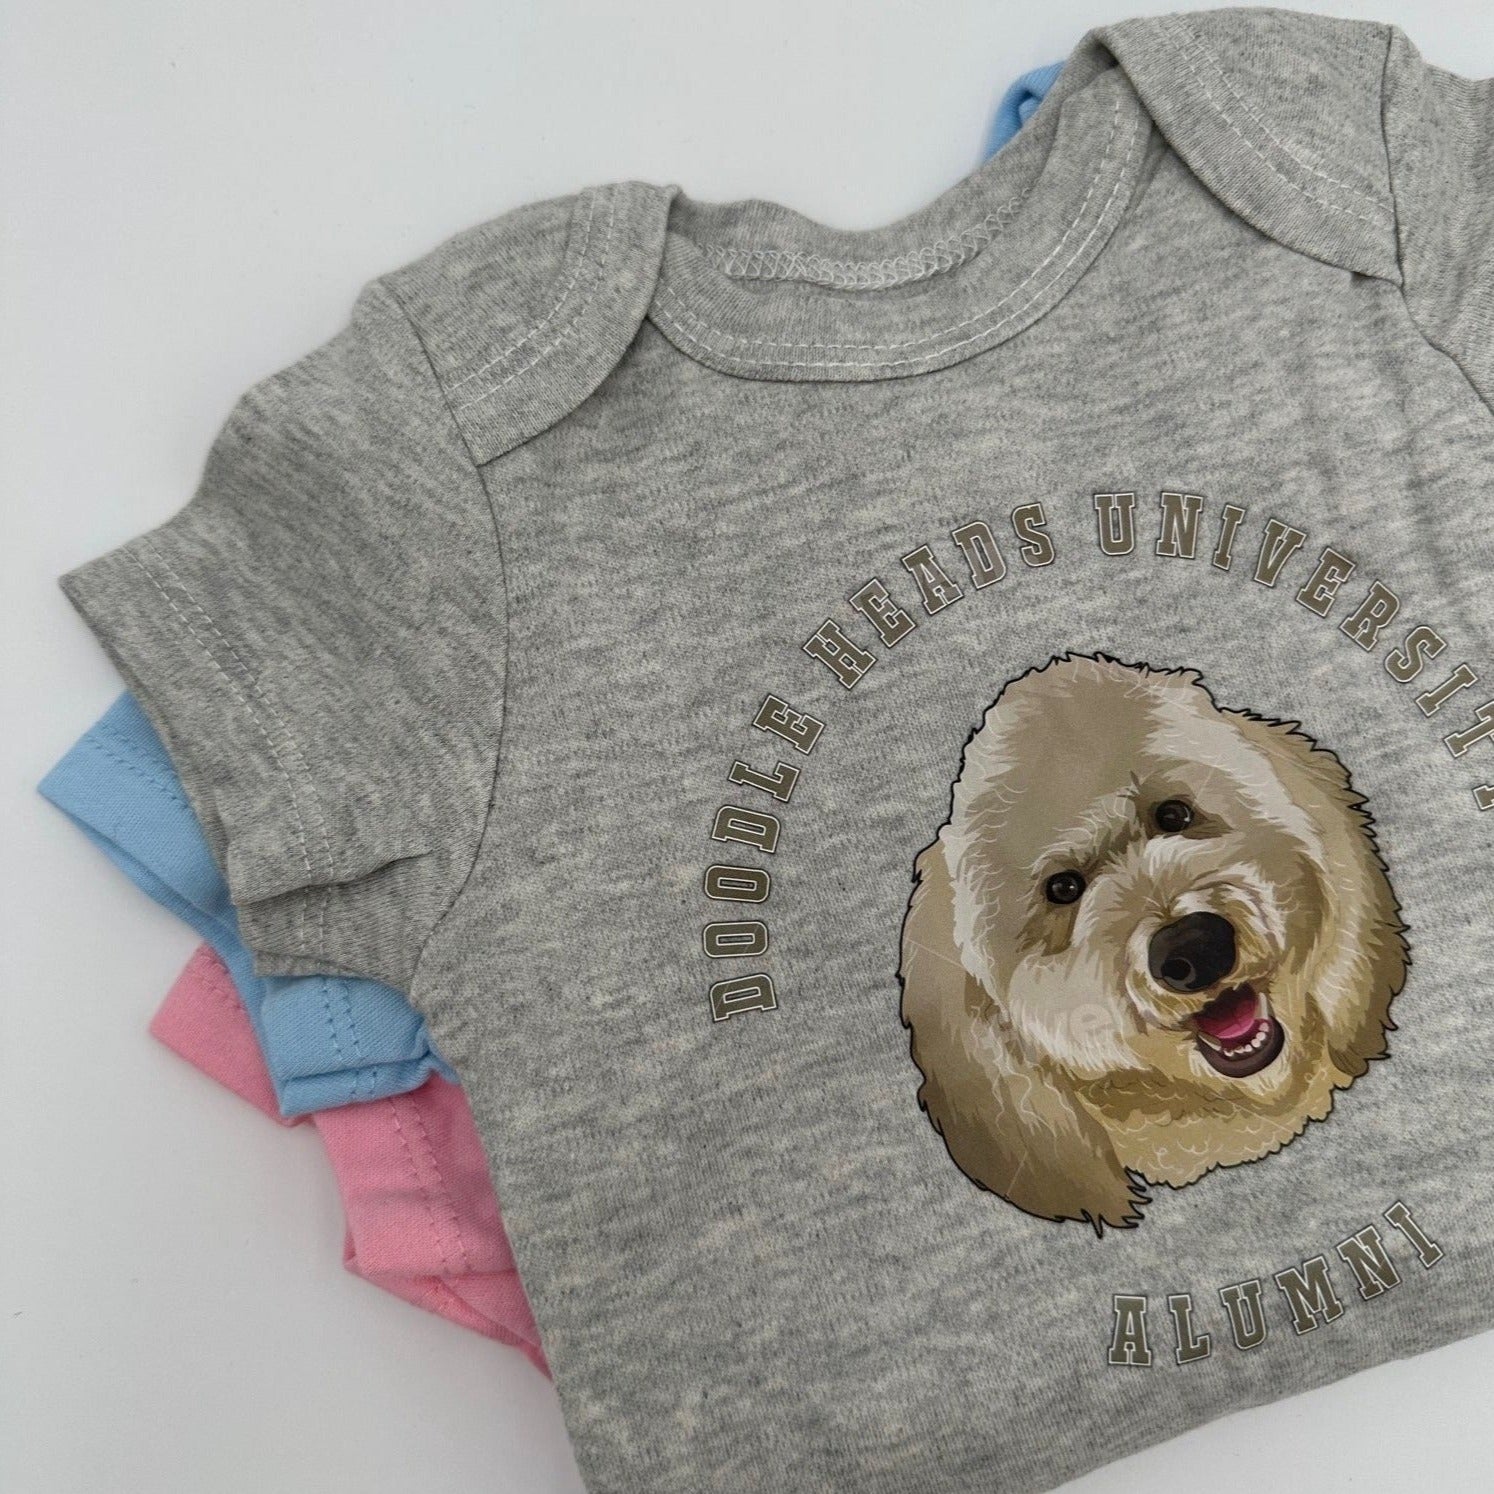 Doodle Heads Alumni Baby Onesie - Perfect for Your Little Graduate!